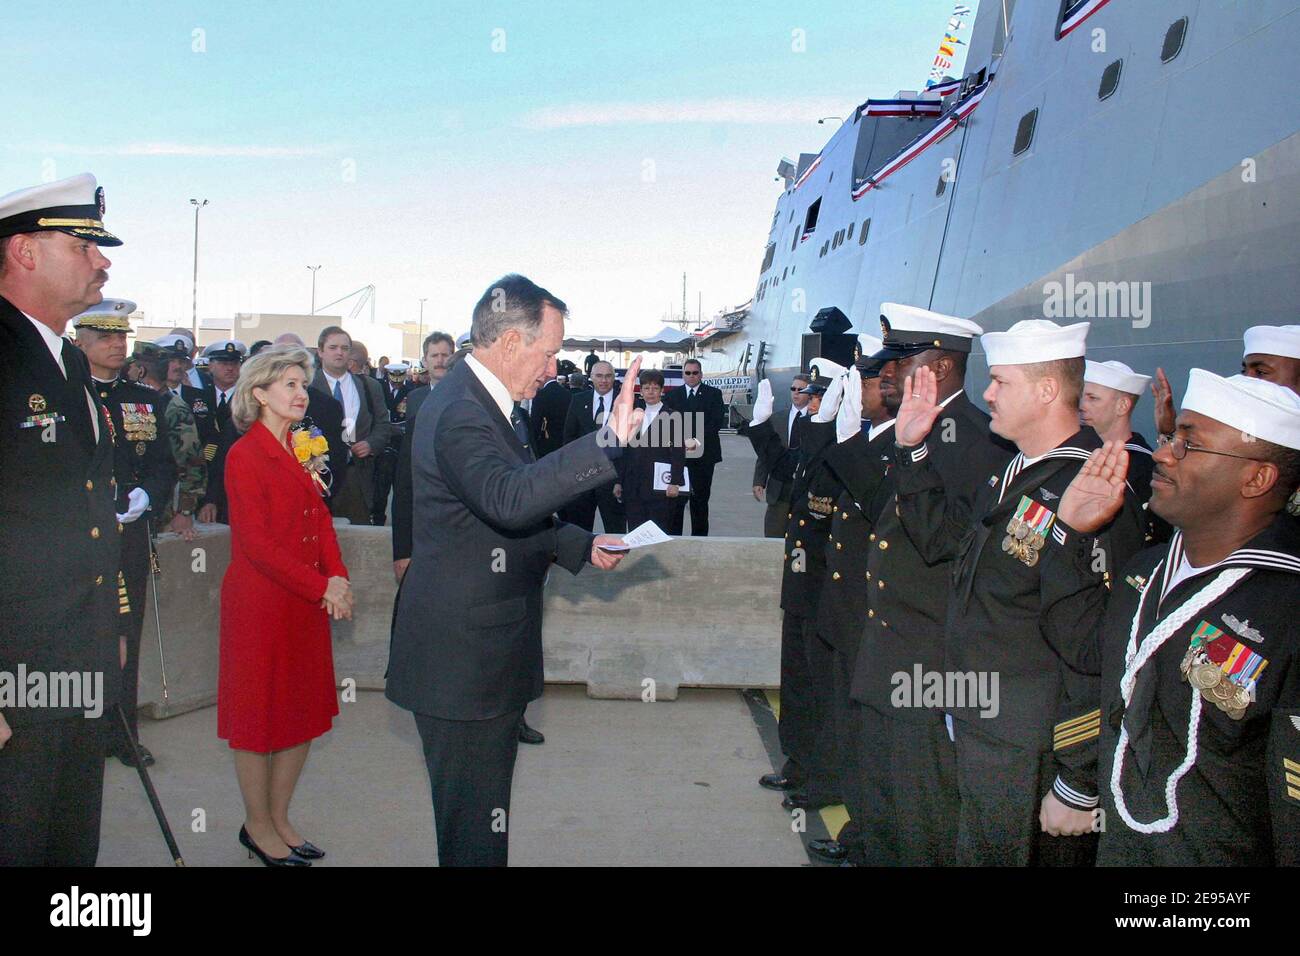 Sailors assigned to USS San Antonio (LPD 17) enjoy a rare honor, and receive the oath of enlistment by former US President George Bush, on commissioning day in Ingleside, TX on January 14, 2006. As the first in her class, USS San Antonio (LPD 17) represents a key element of the Navy Stock Photo